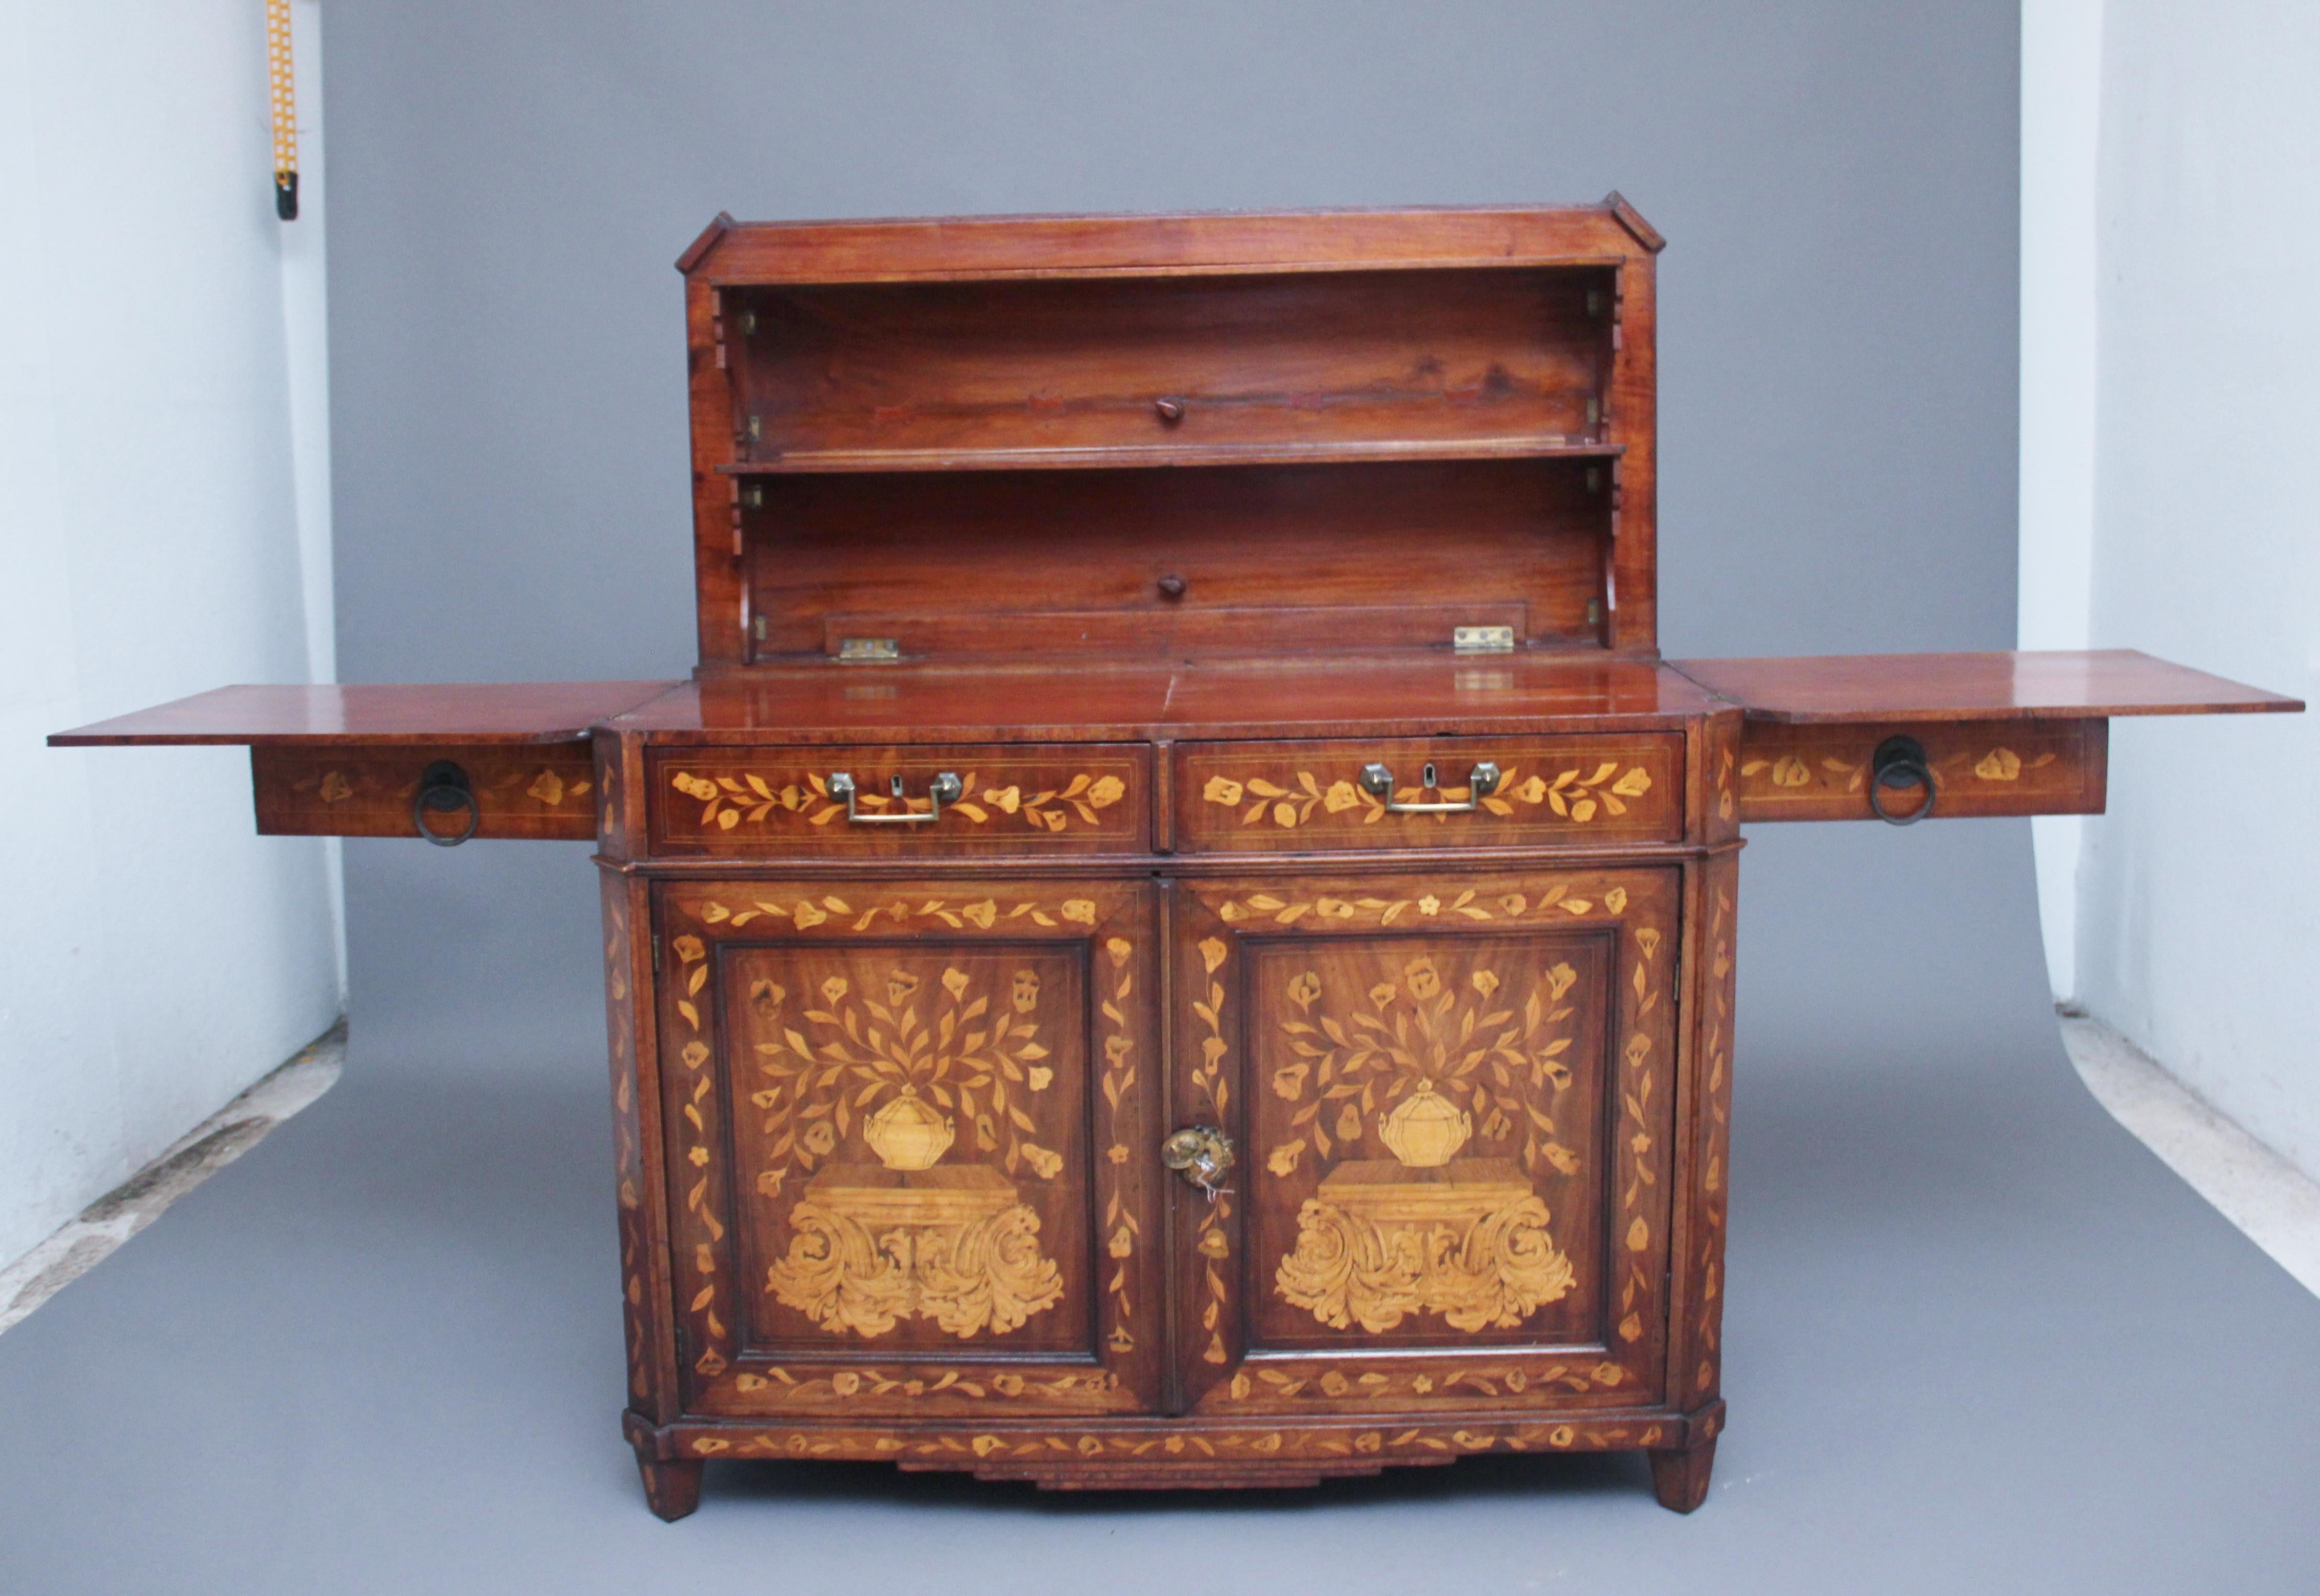 Early 19th Century Dutch Travelling Cabinet In Good Condition For Sale In Martlesham, GB